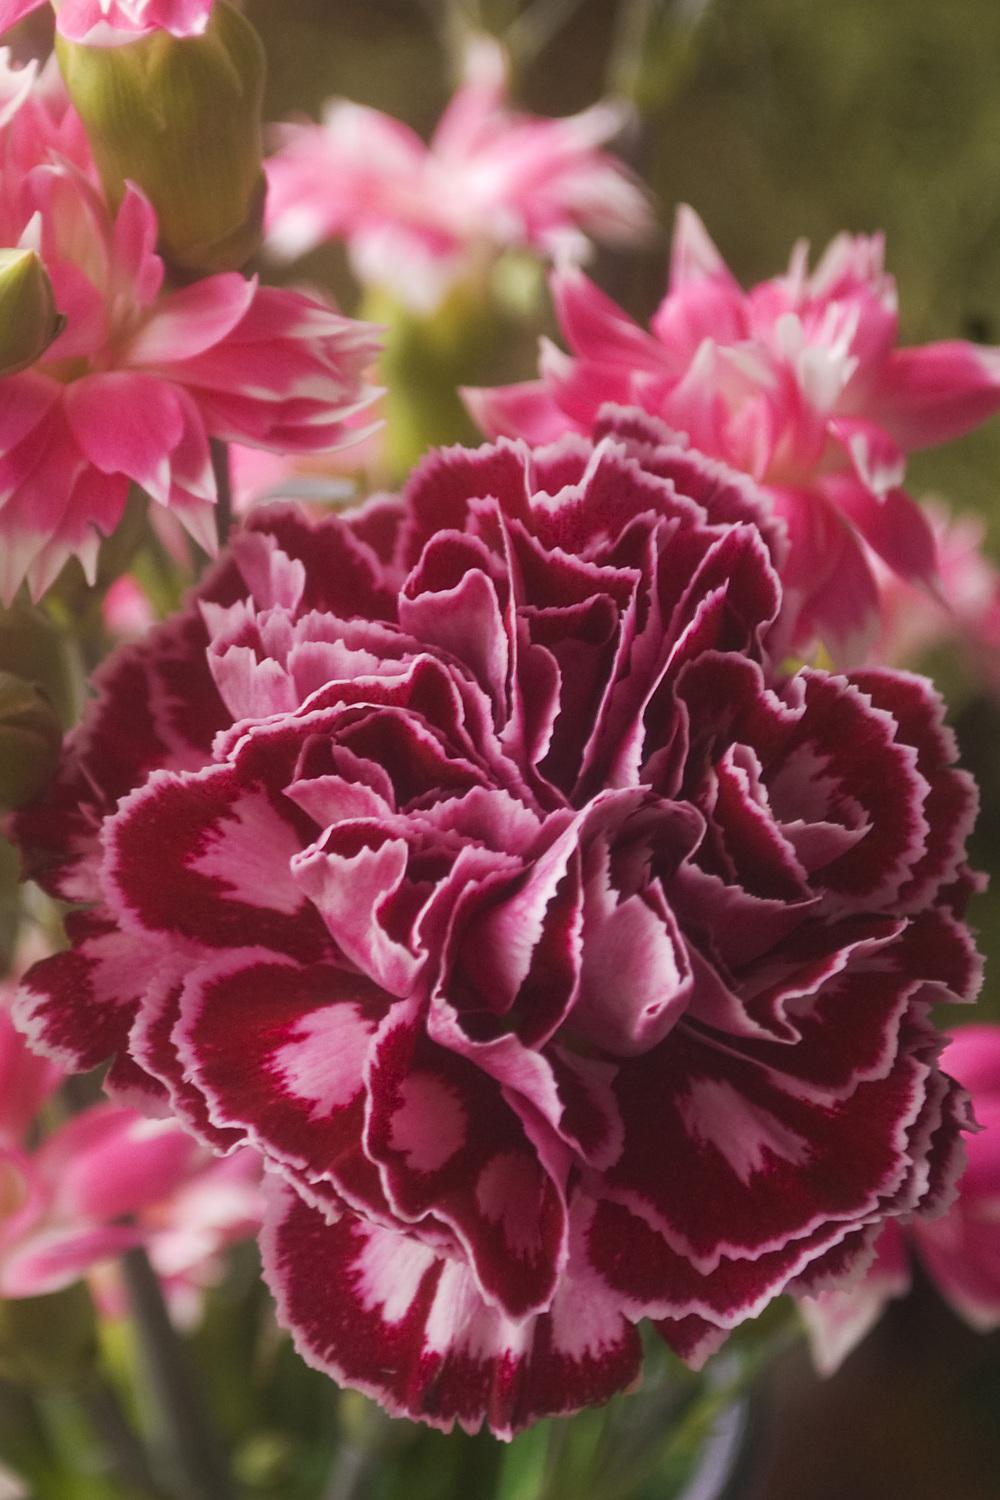 Photo of Dianthus uploaded by AudreyDee